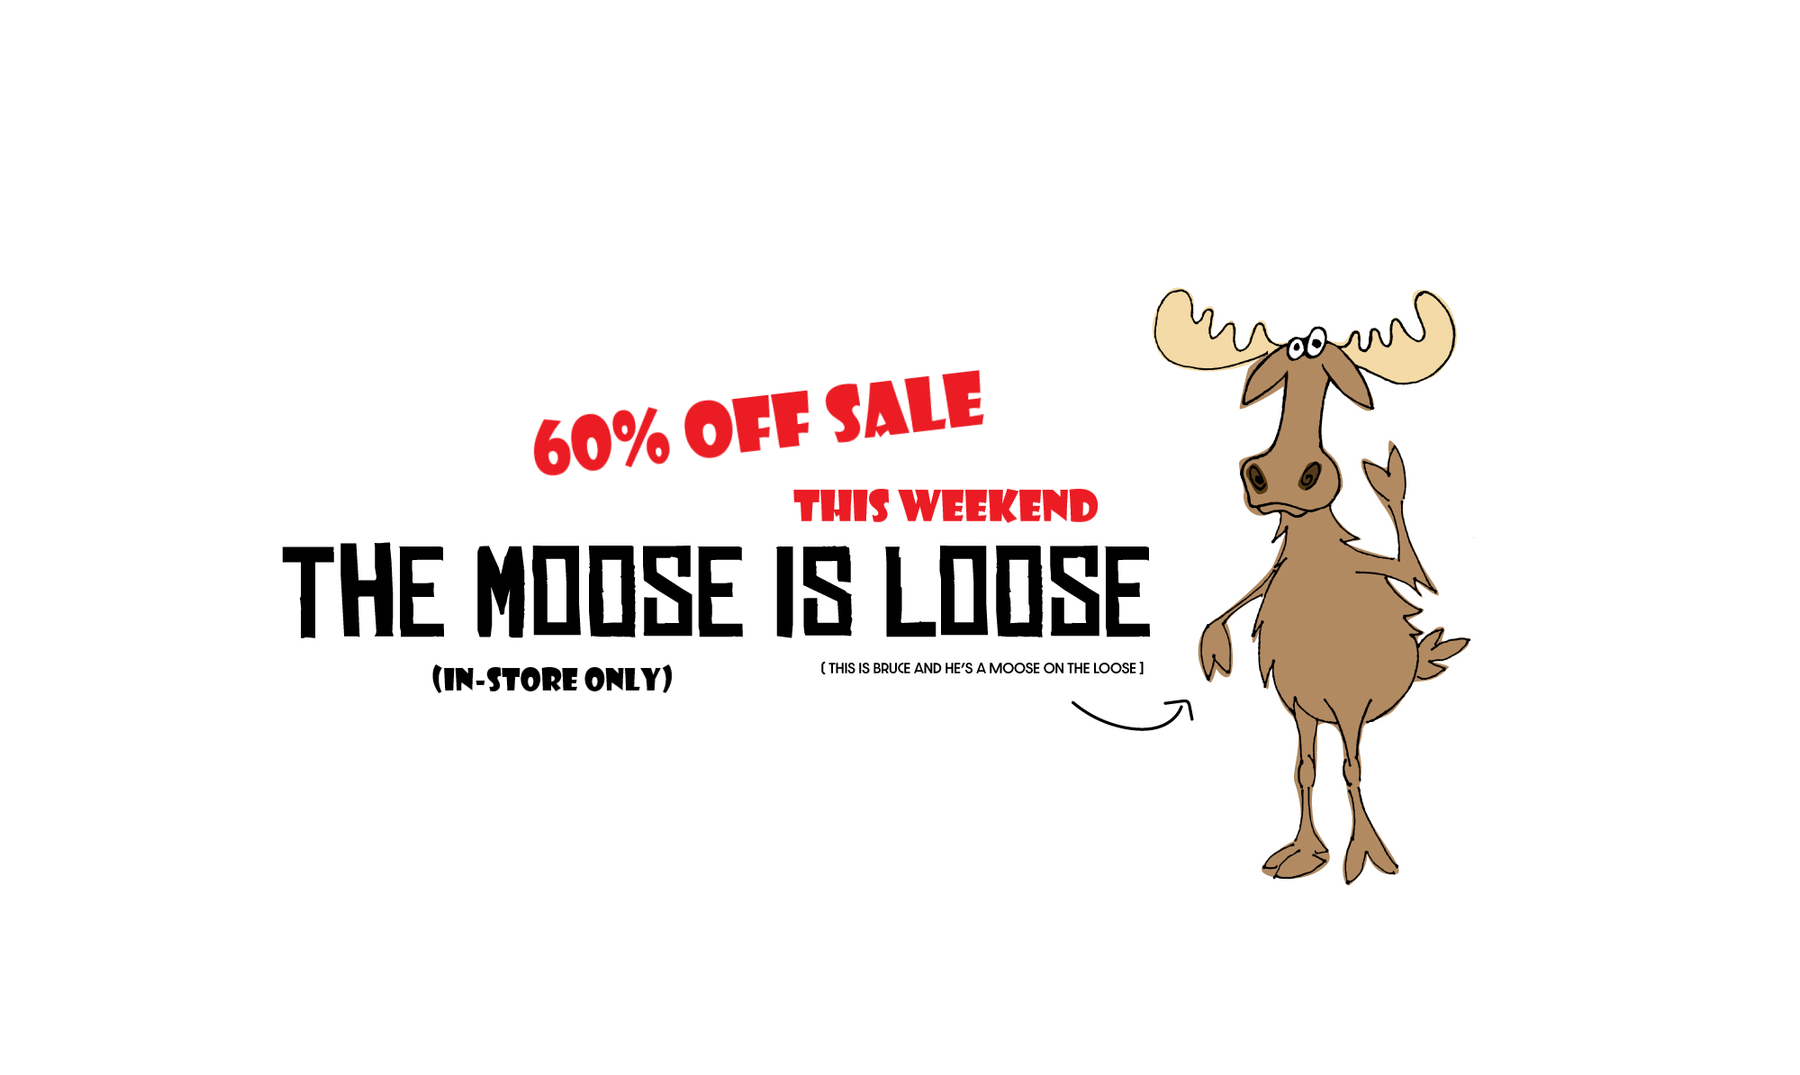 THE MOOSE HAS GONE LOOSE